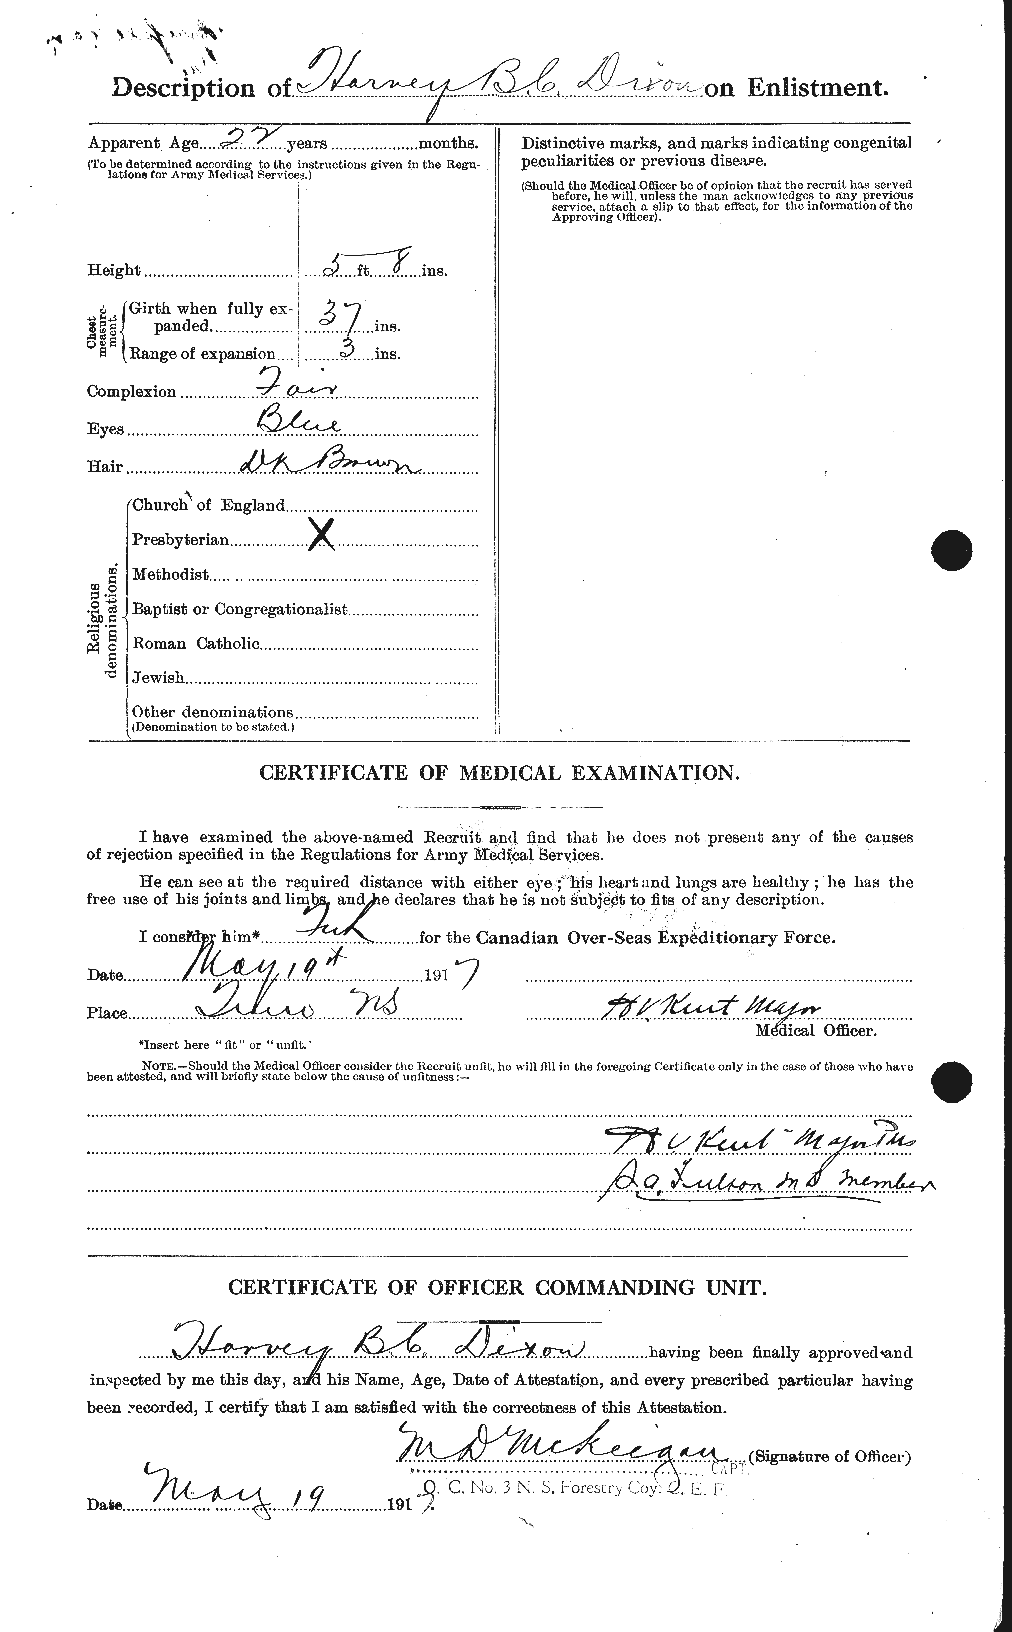 Personnel Records of the First World War - CEF 296766b